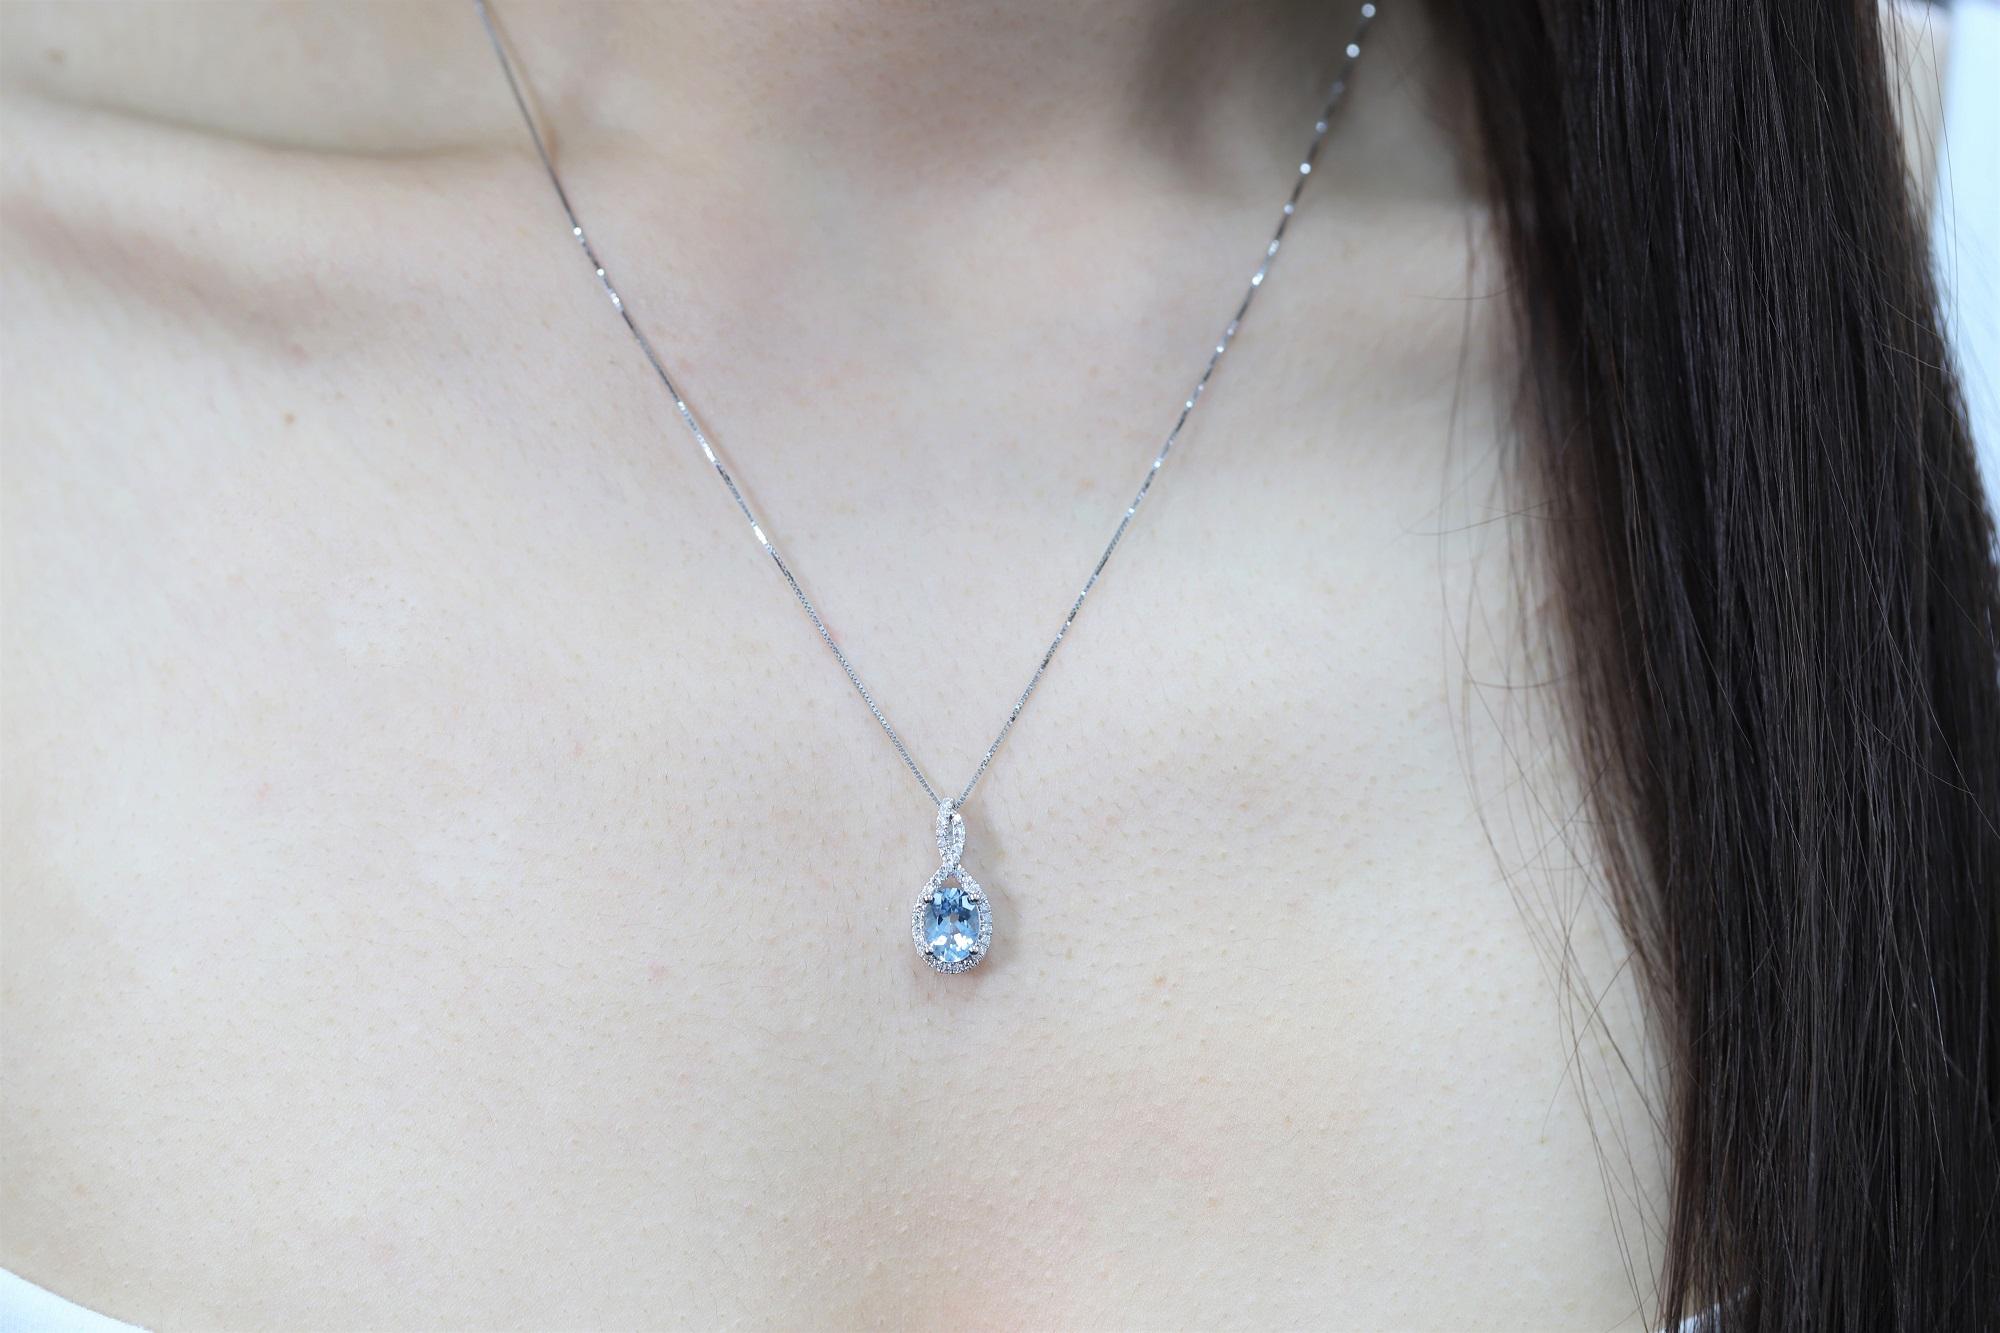 Decorate yourself in elegance with this Pendant is crafted from 10-karat White Gold by Gin & Grace Pendant. This Pendant is made up of 6X8 Oval-Cut Prong setting Genuine Aquamarine (1 Pcs) 1.0 Carat and Round-Cut Prong setting Natural White Diamond